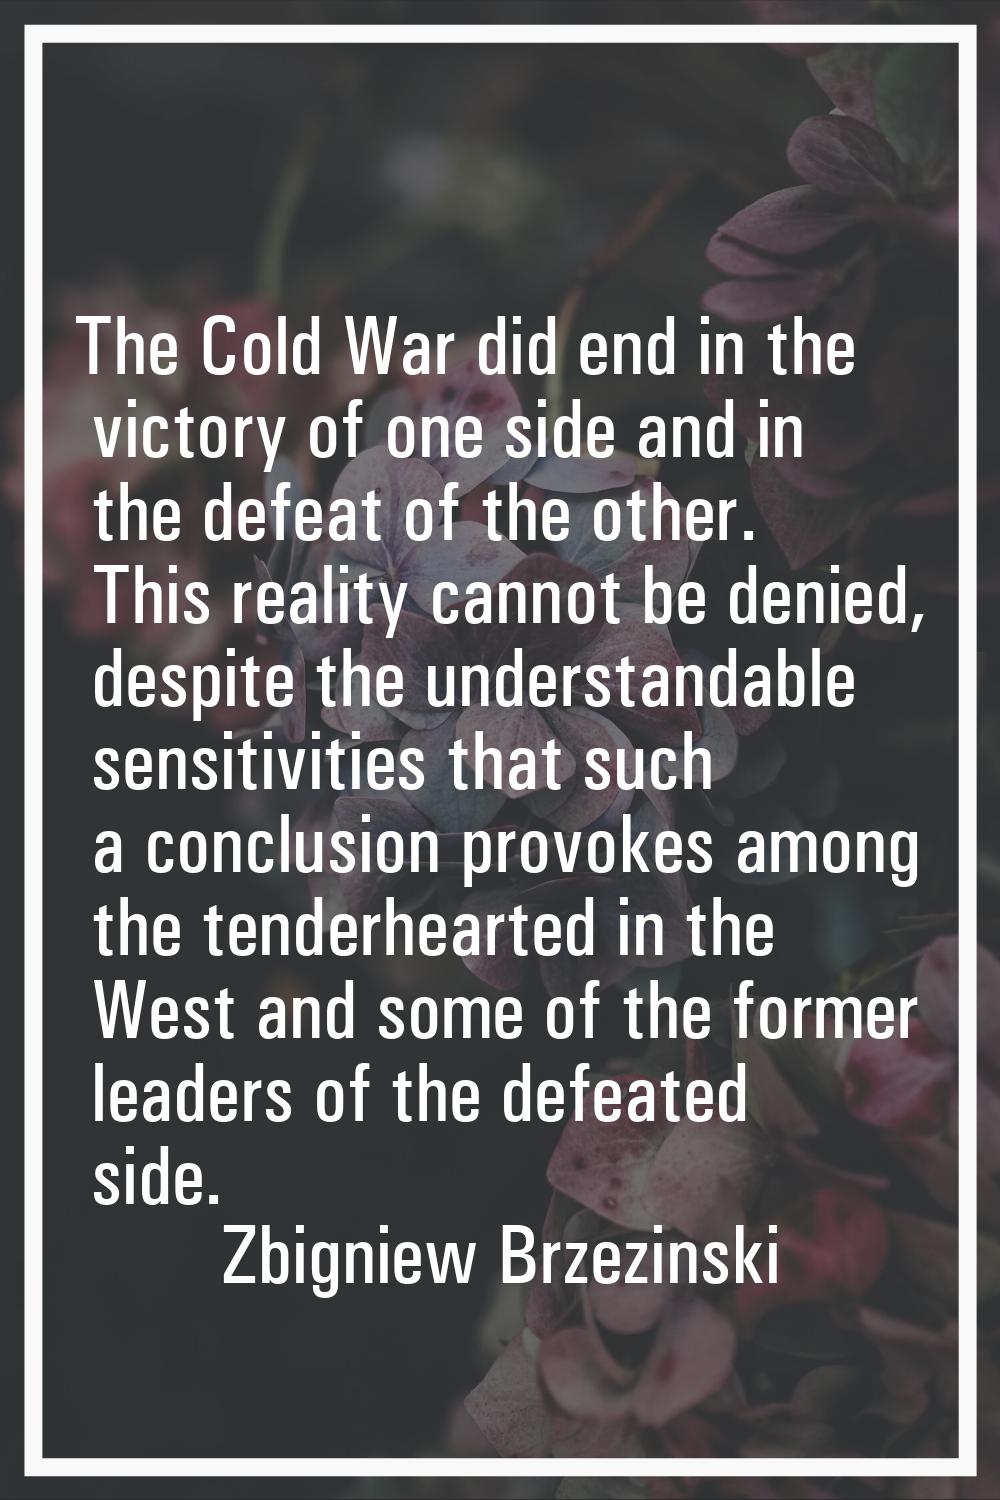 The Cold War did end in the victory of one side and in the defeat of the other. This reality cannot